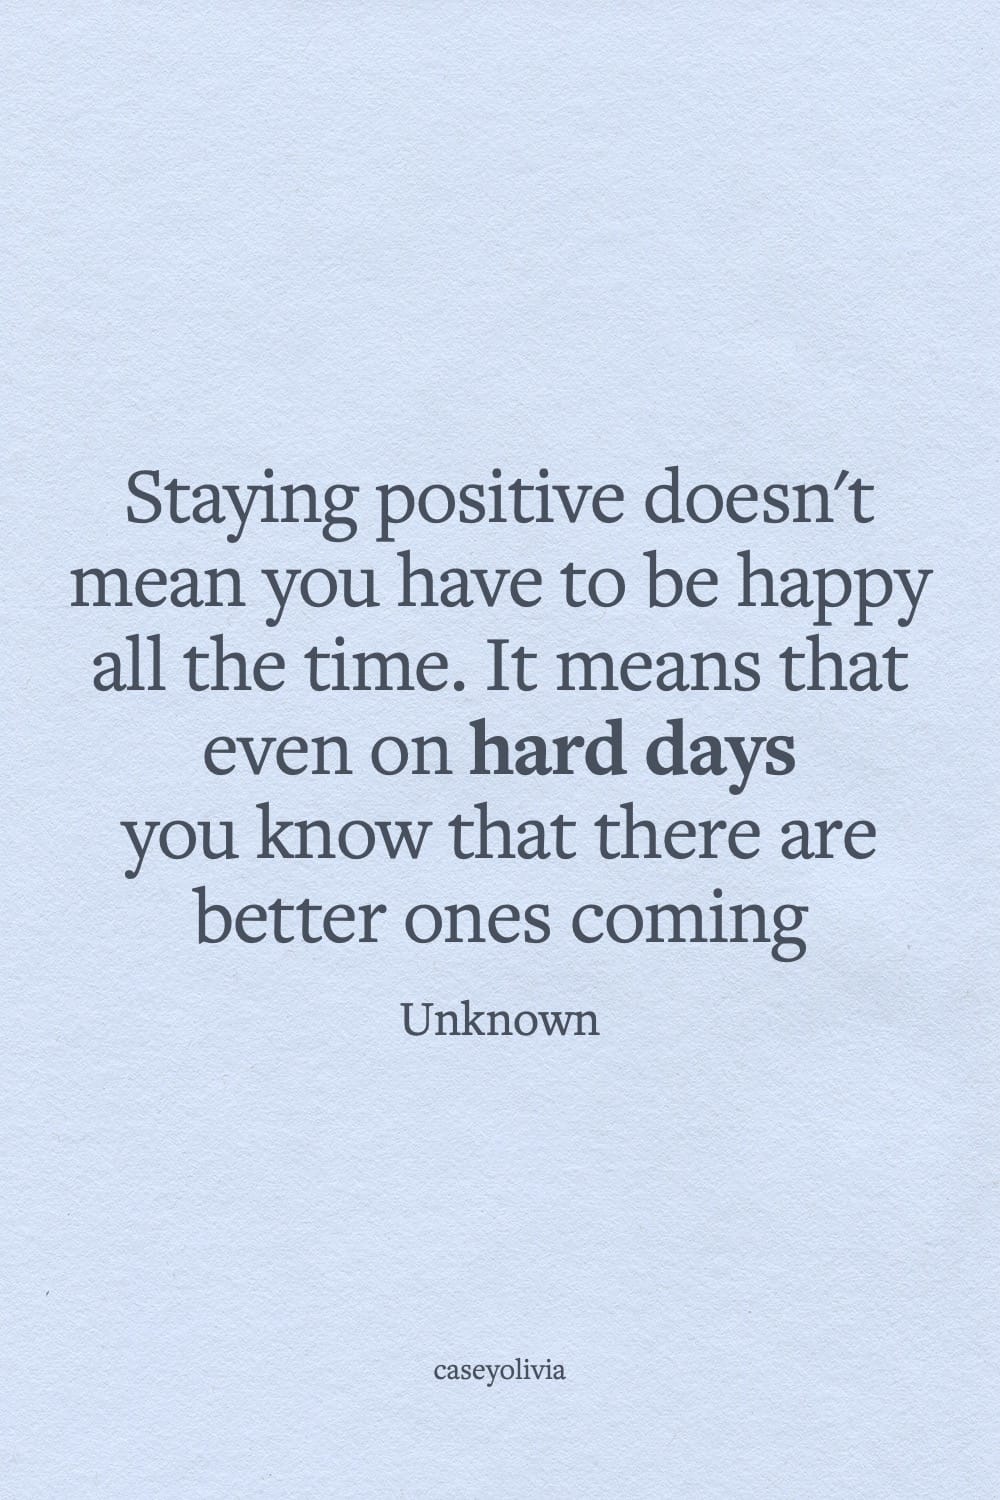 better days are coming quote about being optimistic